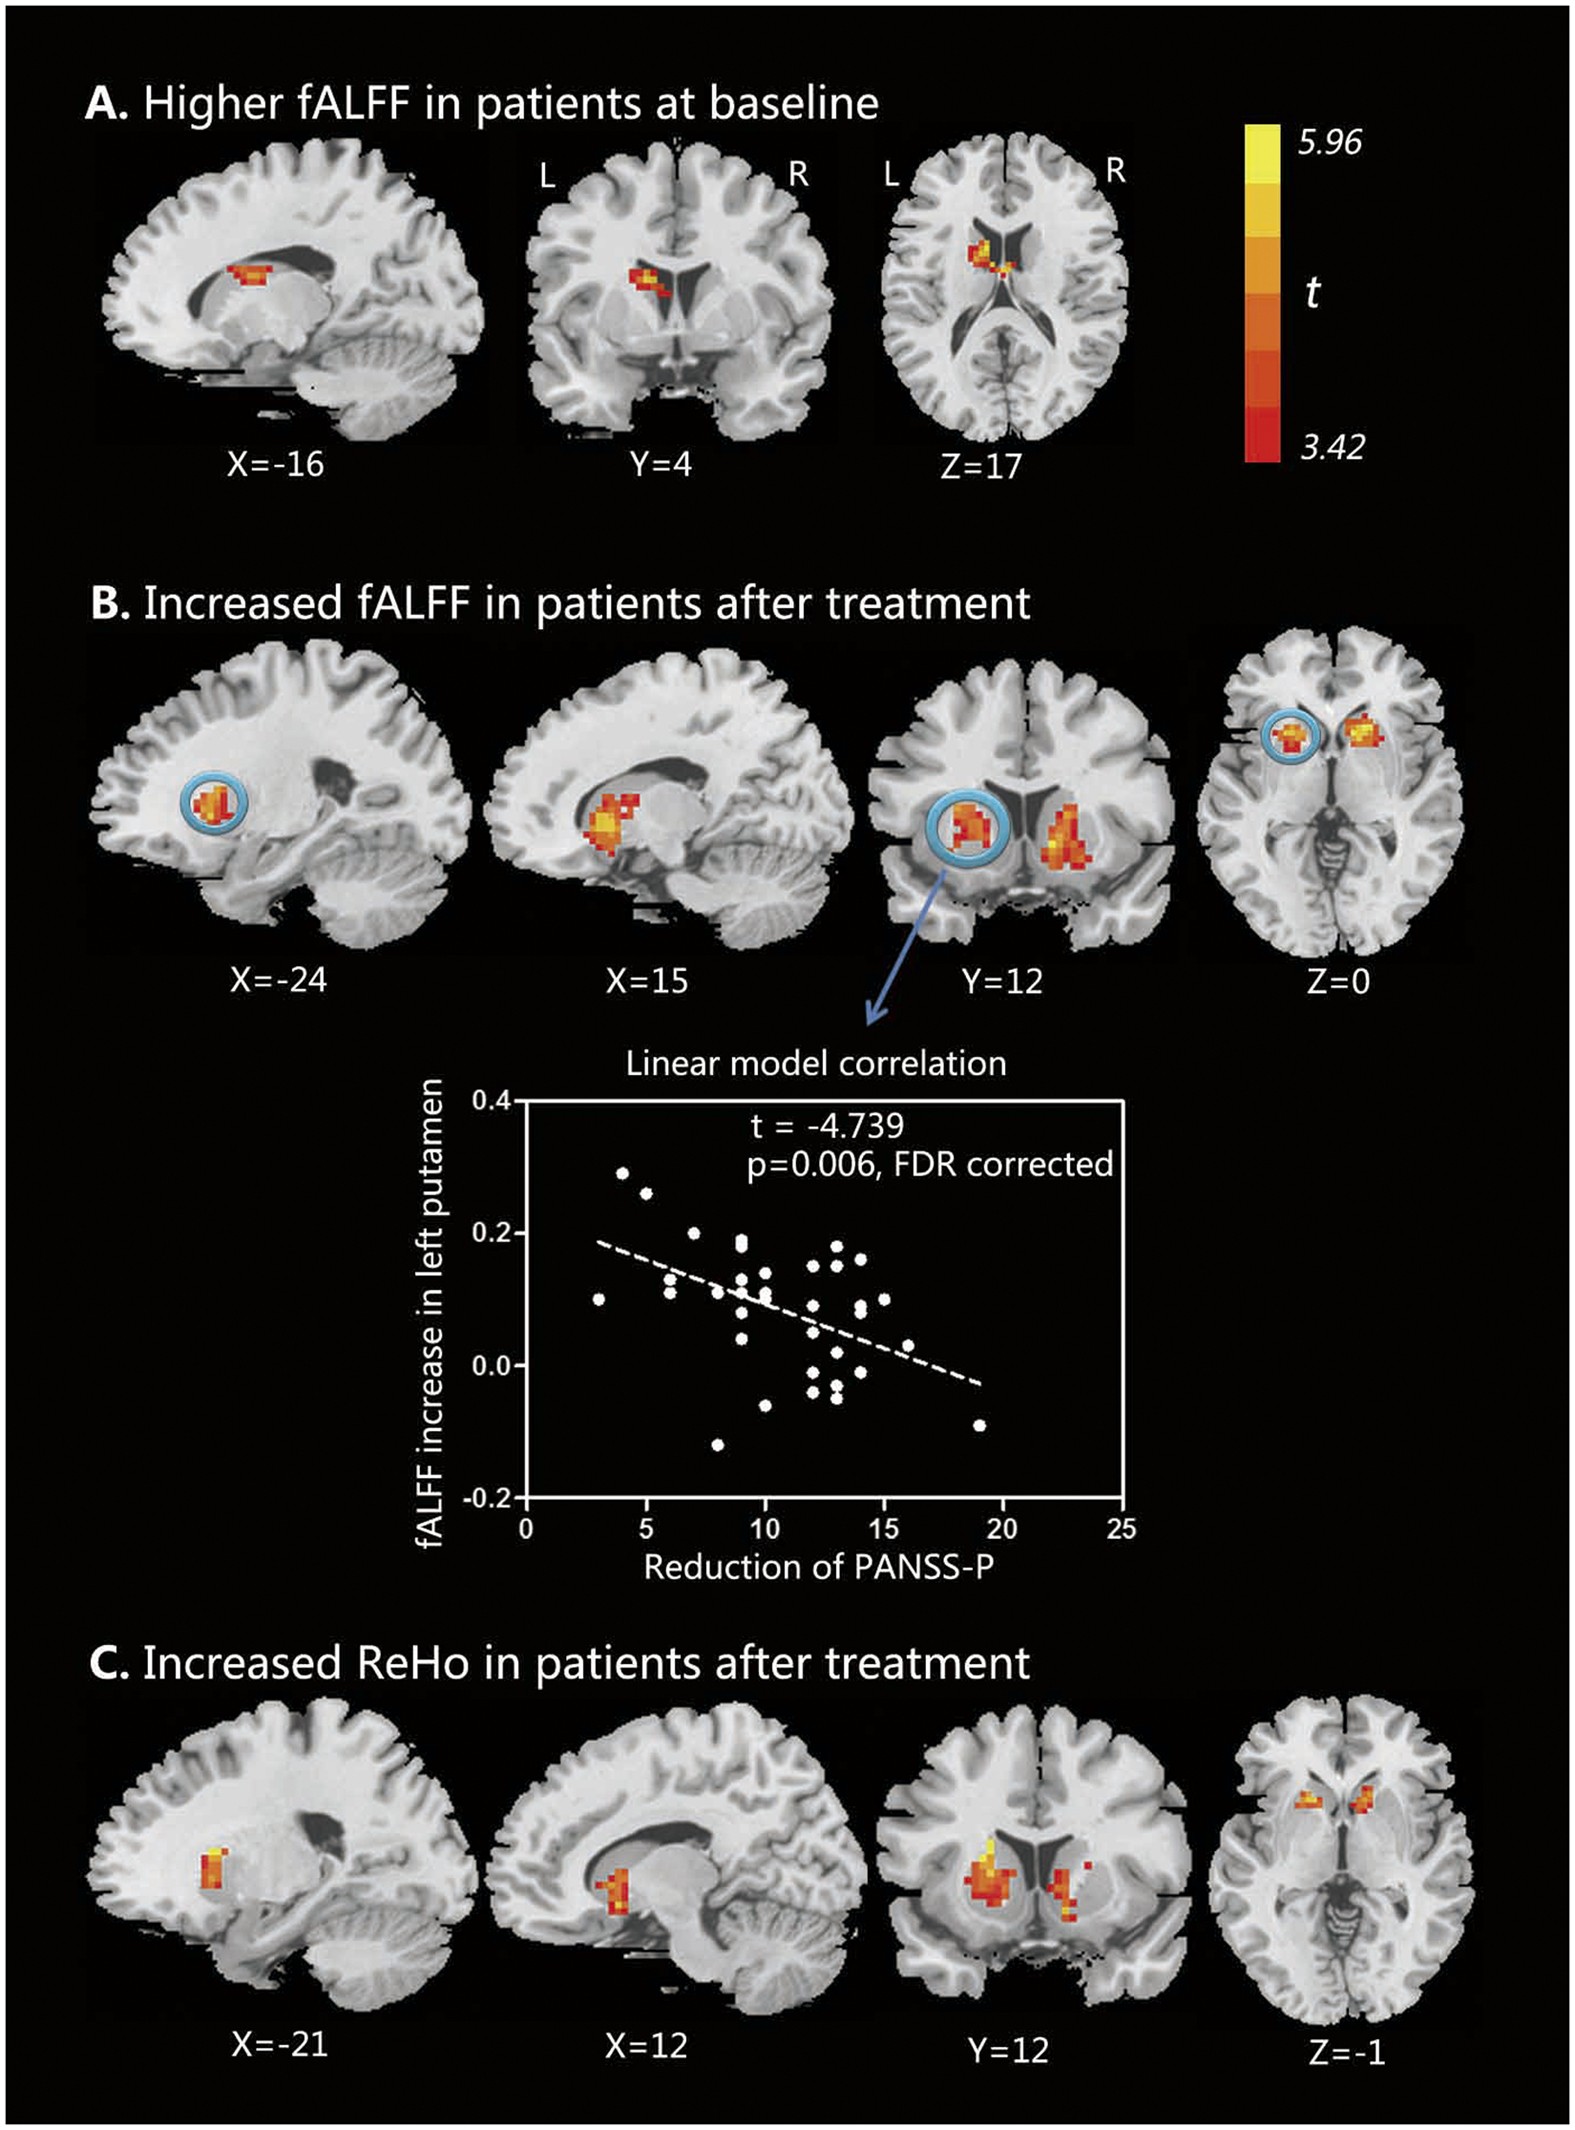 Short-term Effects of Risperidone Monotherapy on Spontaneous Brain Activity  in First-episode Treatment-naïve Schizophrenia Patients: A Longitudinal  fMRI Study | Scientific Reports